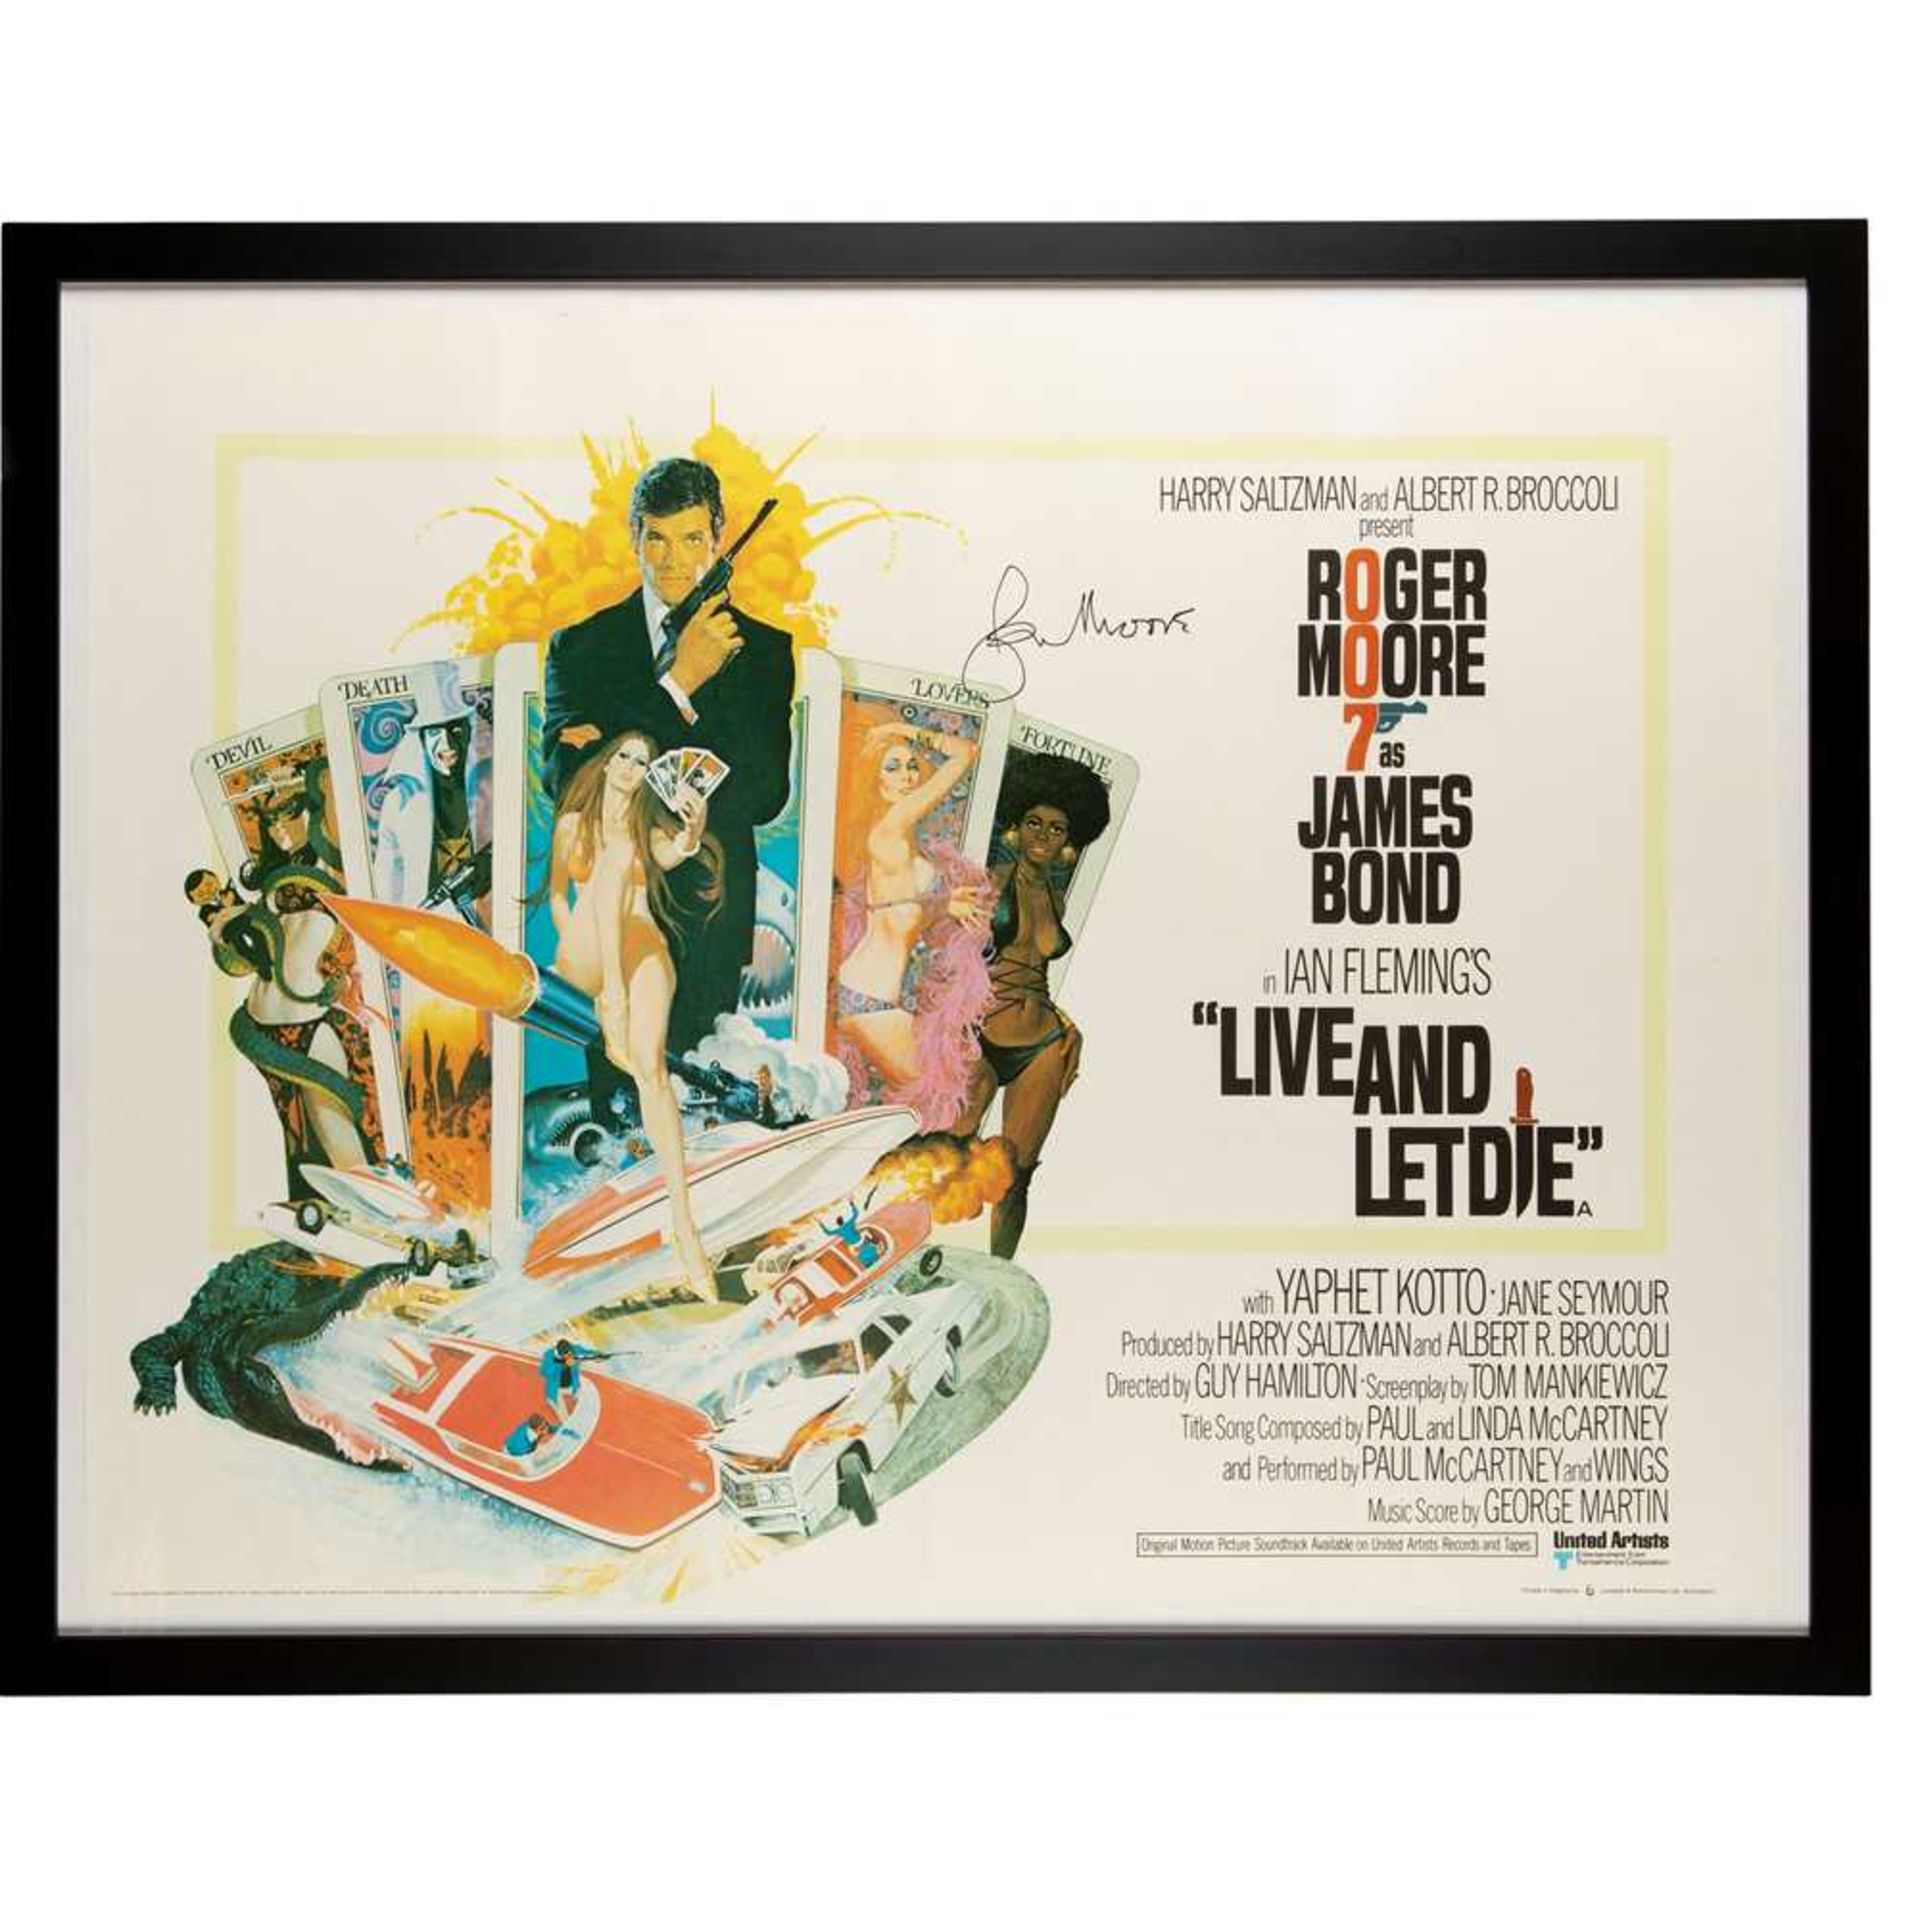 ROBERT MCGINNIS (B.1926) LIVE AND LET DIE, SIGNED BY ROGER MOORE